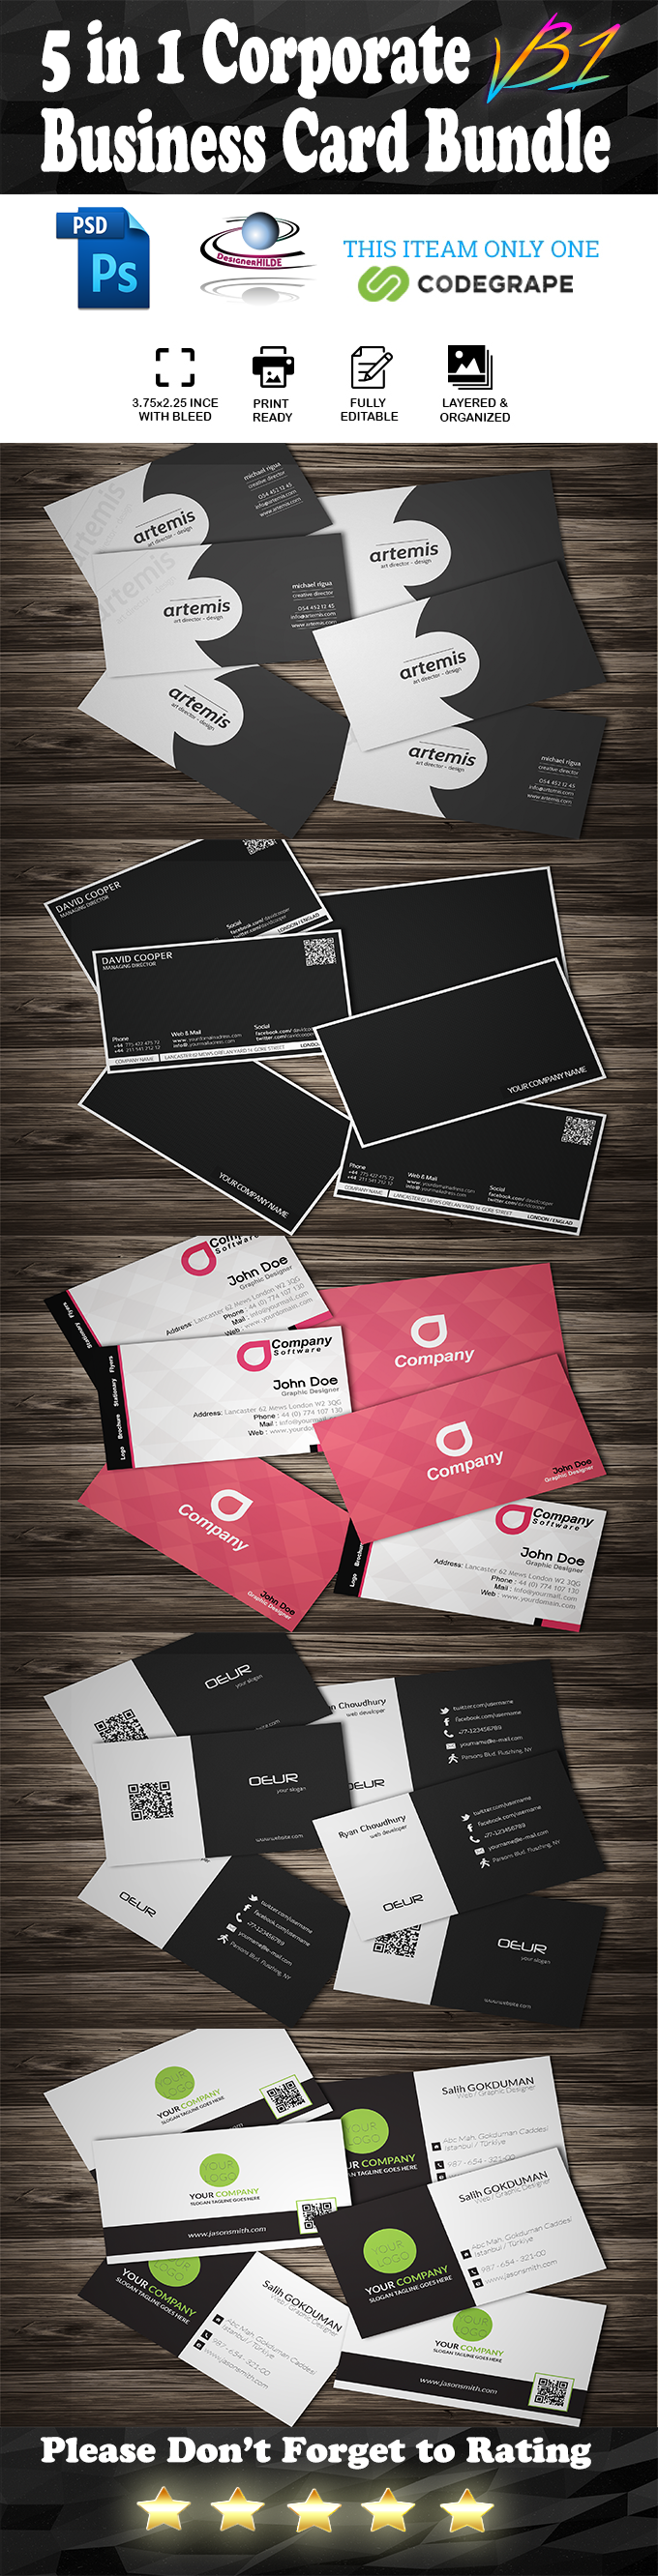 5 in 1 Corporate Business Card Bundle v31